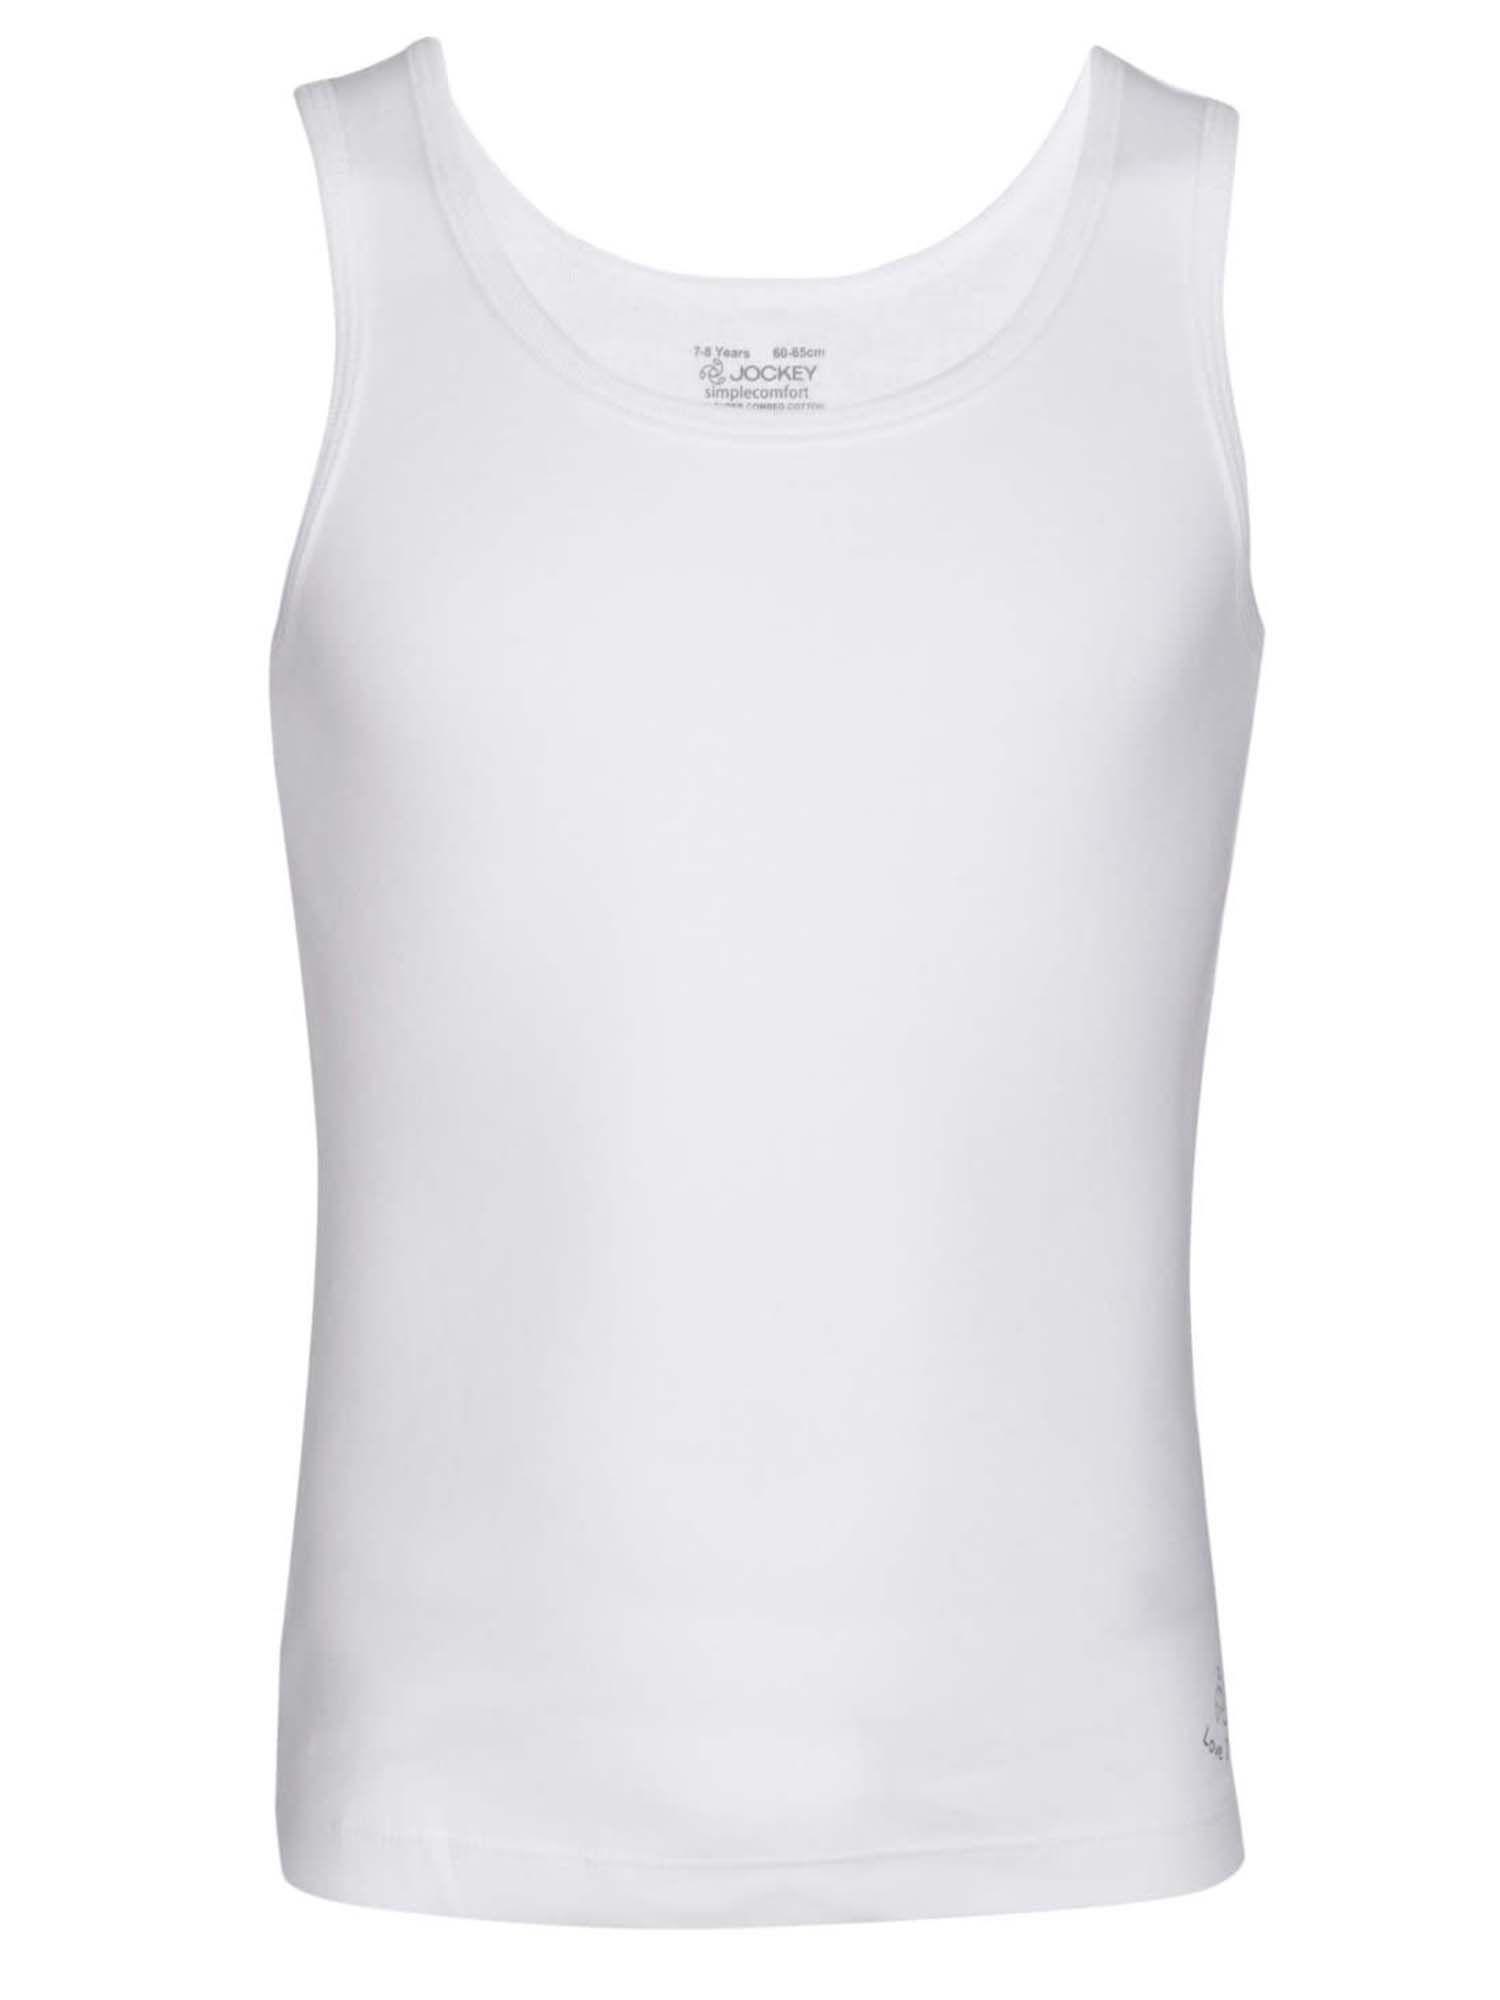 white girls tank top - style number - (sg02)